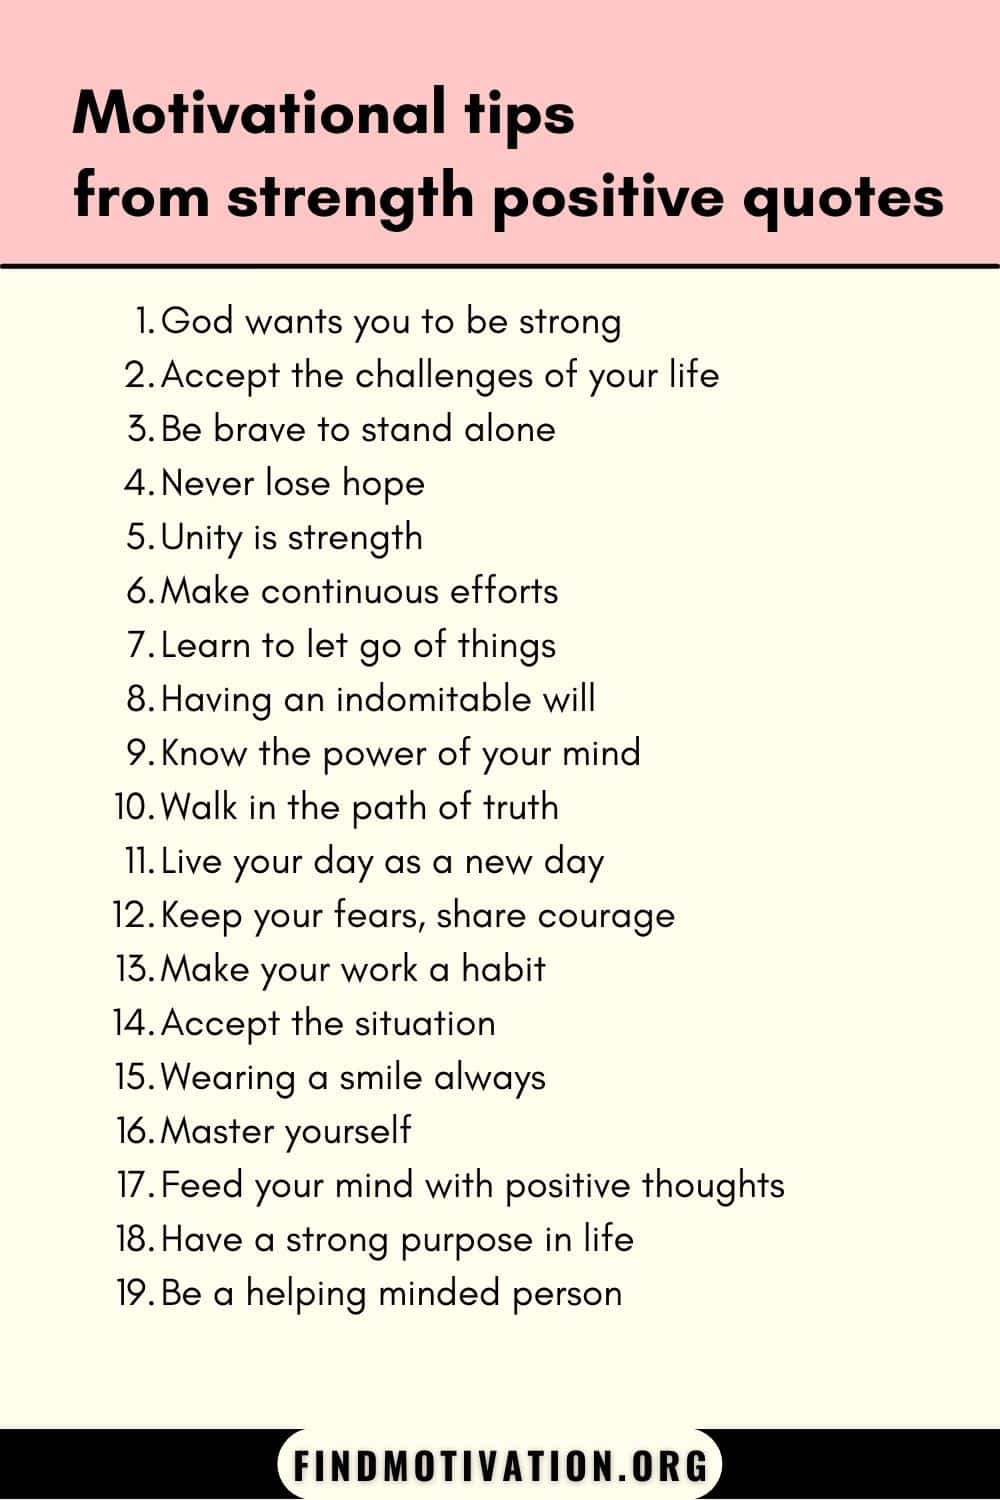 Tips from Strength positive quotes for the day with some learning ways to become more strong